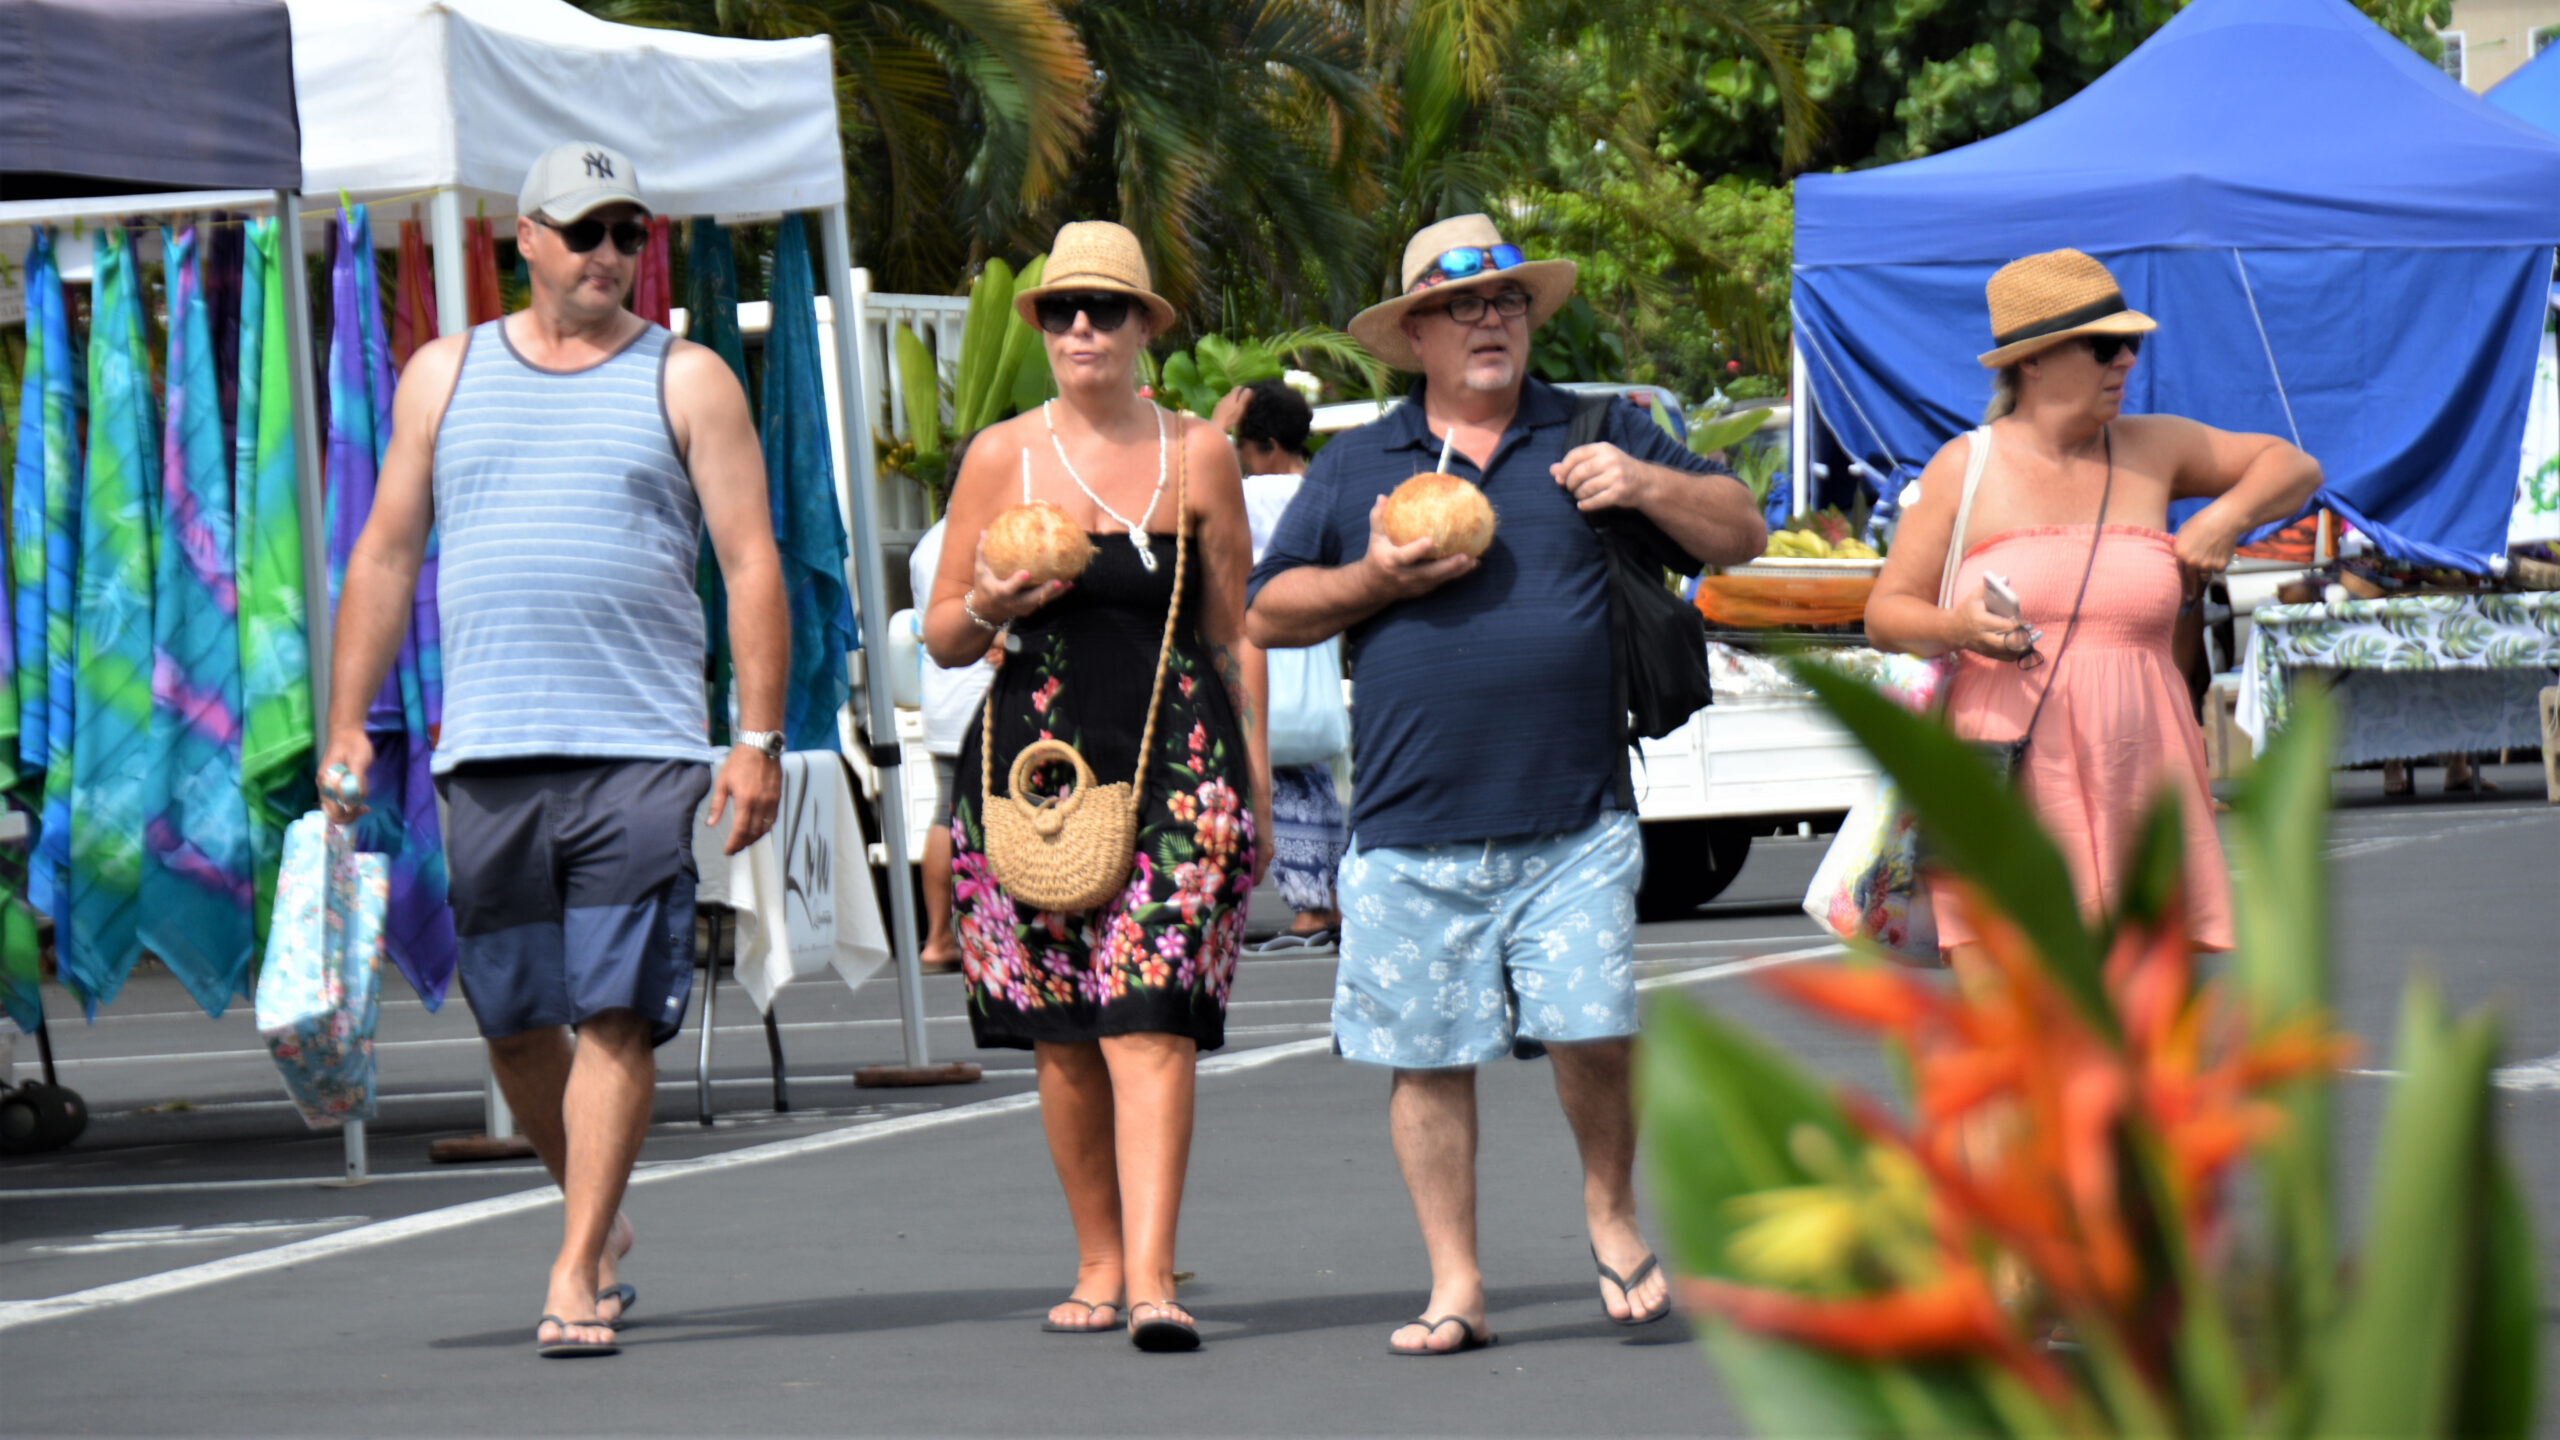 Tourism arrivals in January ‘good start’